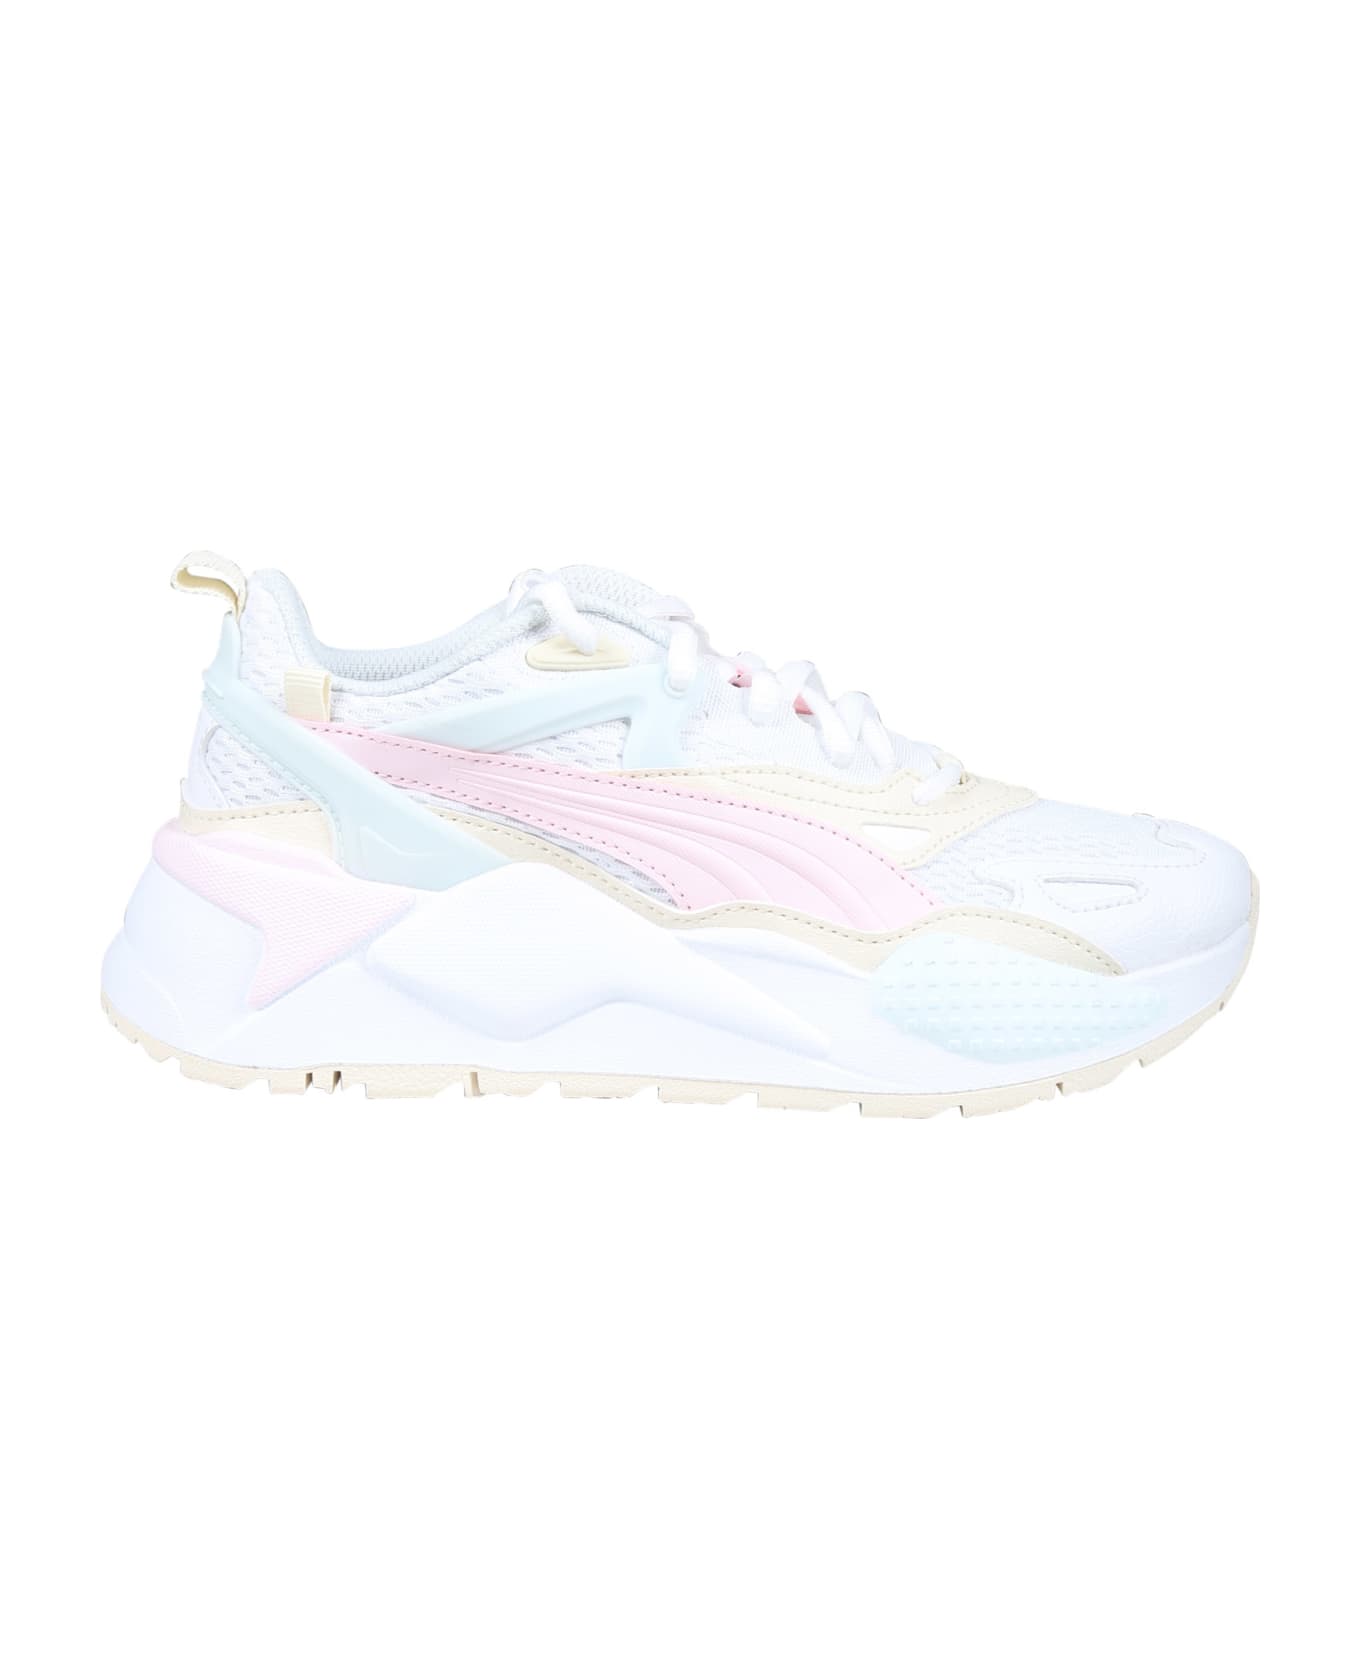 Puma Rs-x Efekt White Low Sneakers For Girl - White